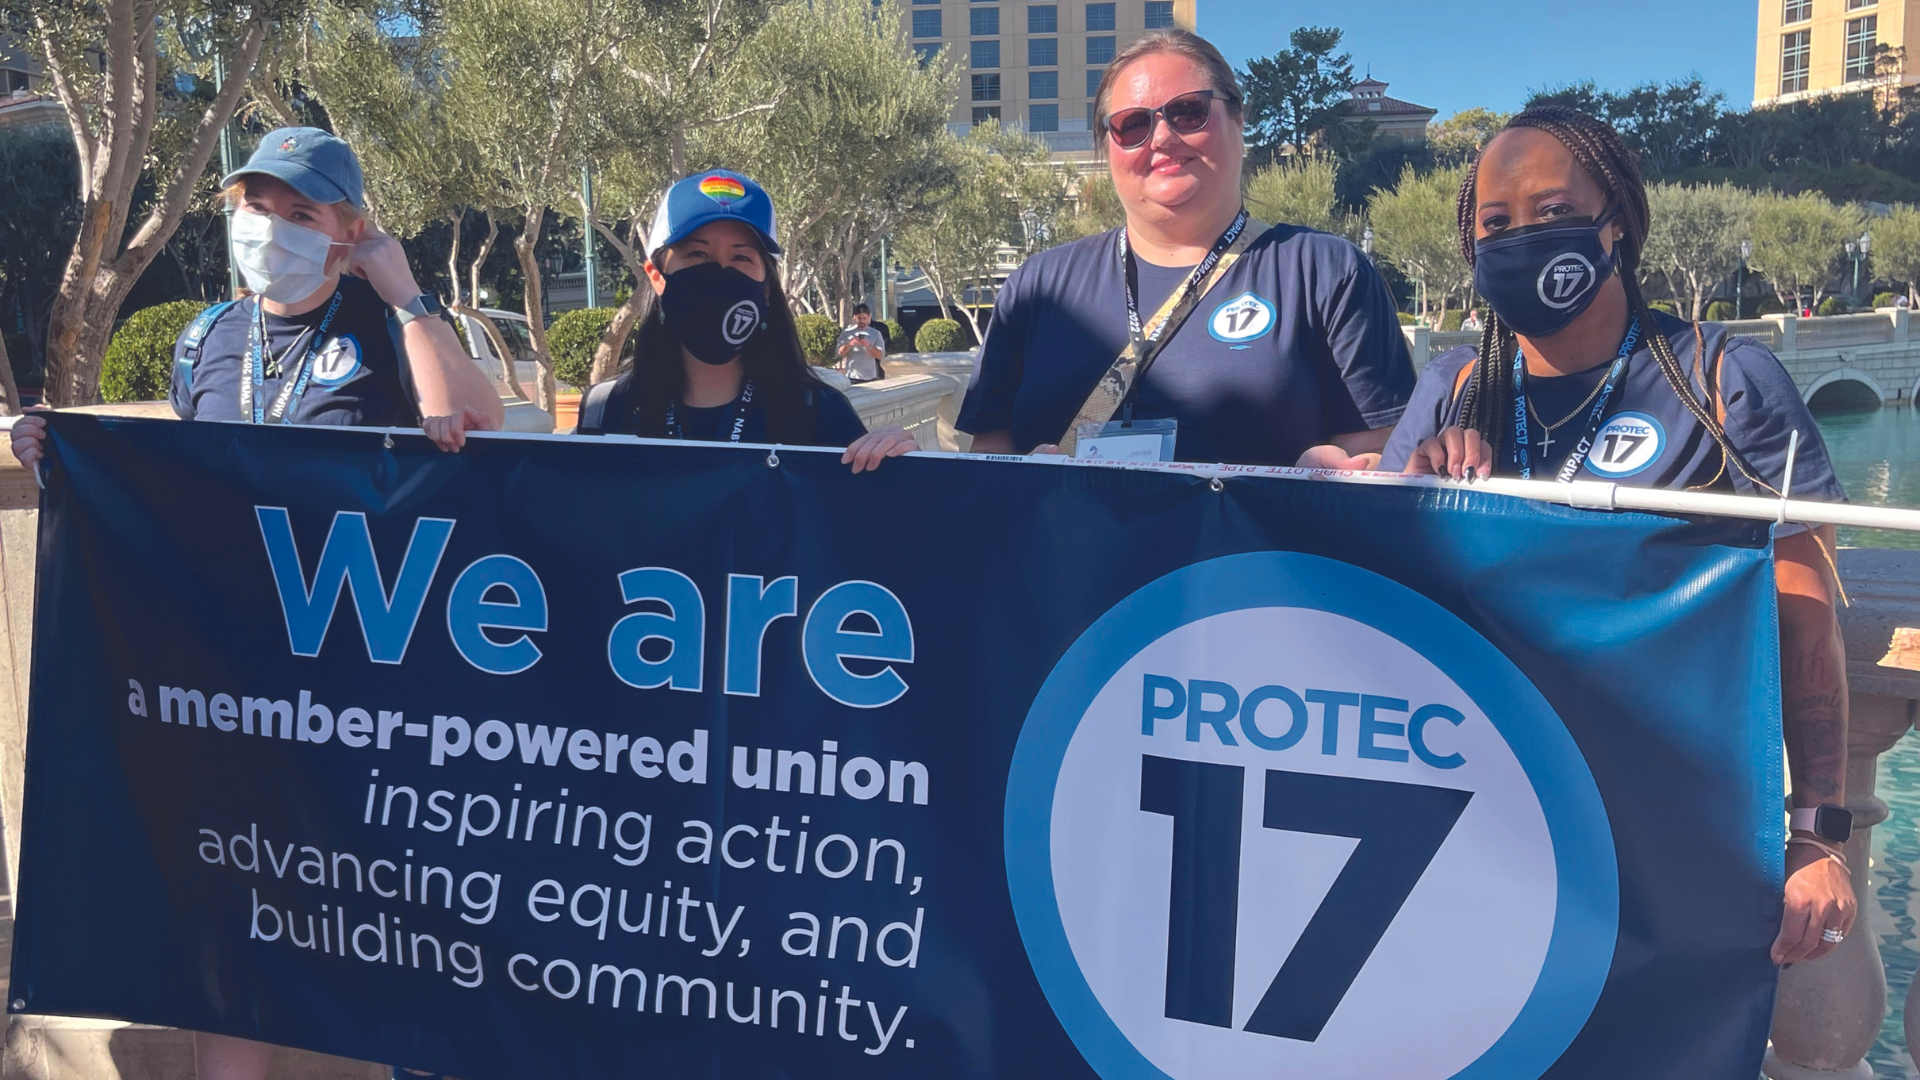 PROTEC17 members Lauren Salter, Liana Woo, Michelle Minto, and Saada Brown from Seattle City Light attended the Tradeswomen Build Nations conference in Las Vegas this fall.